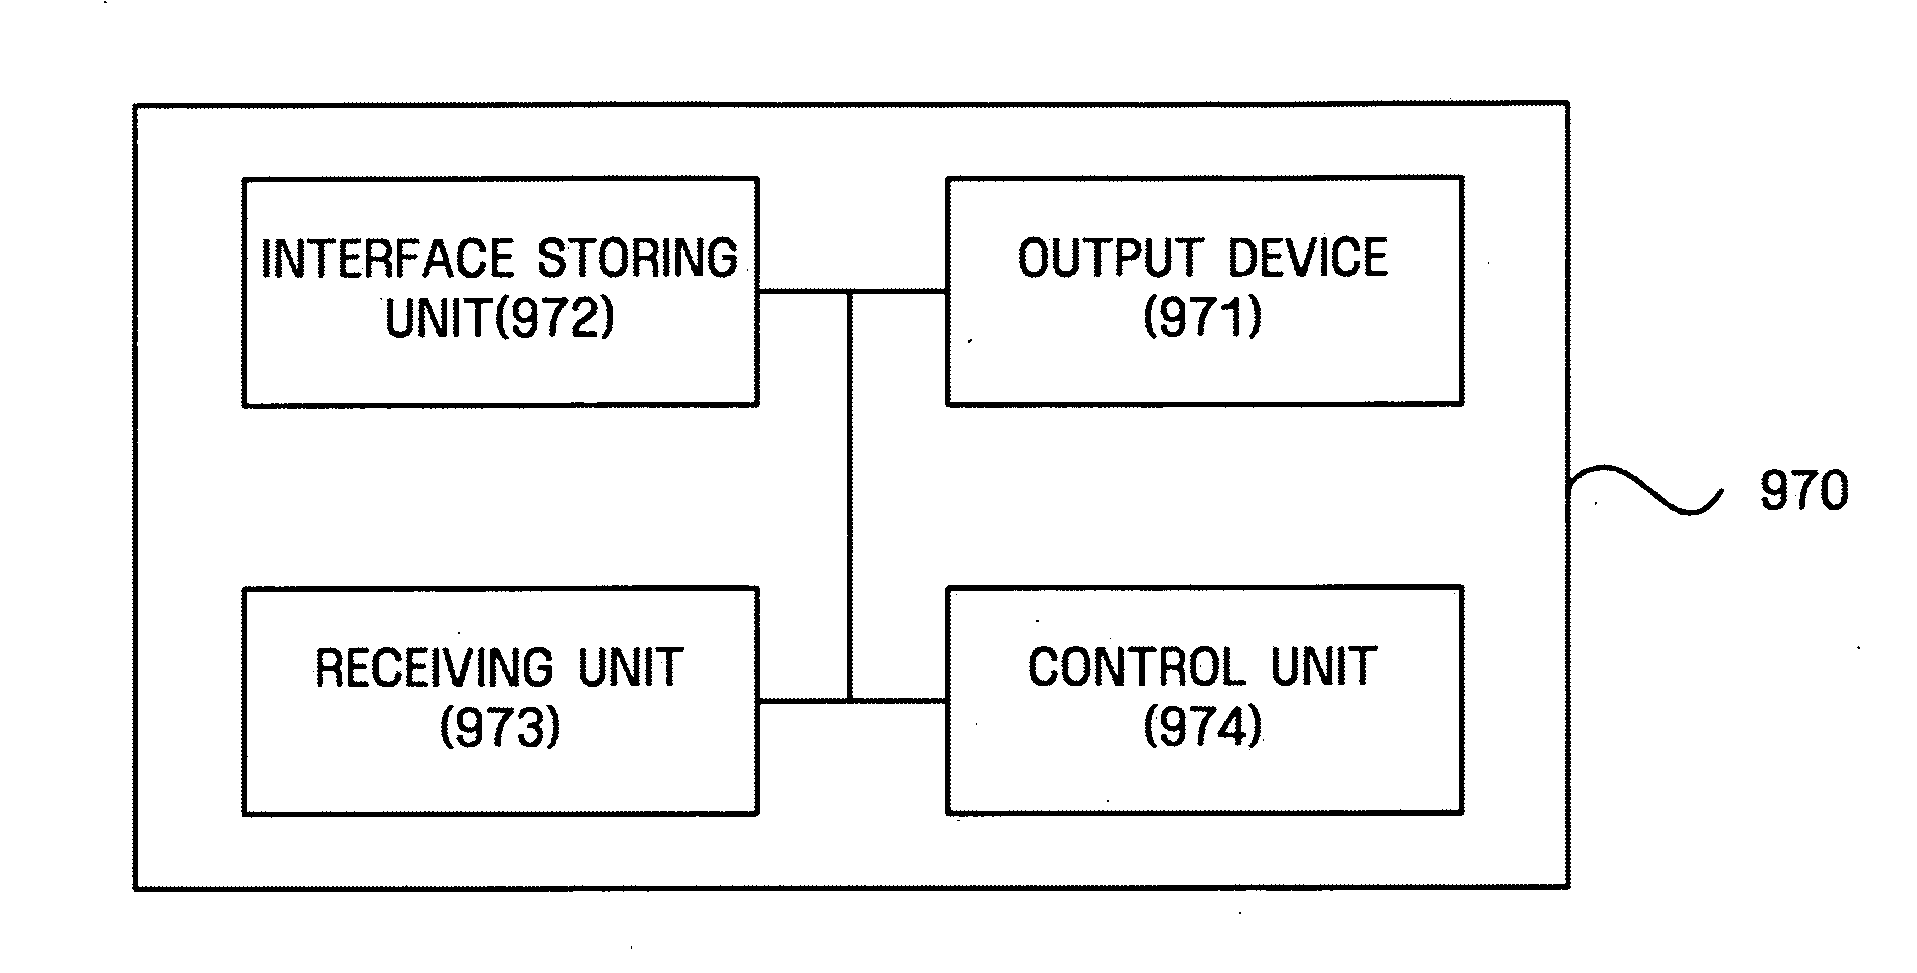 Apparatus and method for supporting user interface enabling user to select menu having position or direction as corresponding to position or direction selected using remote control